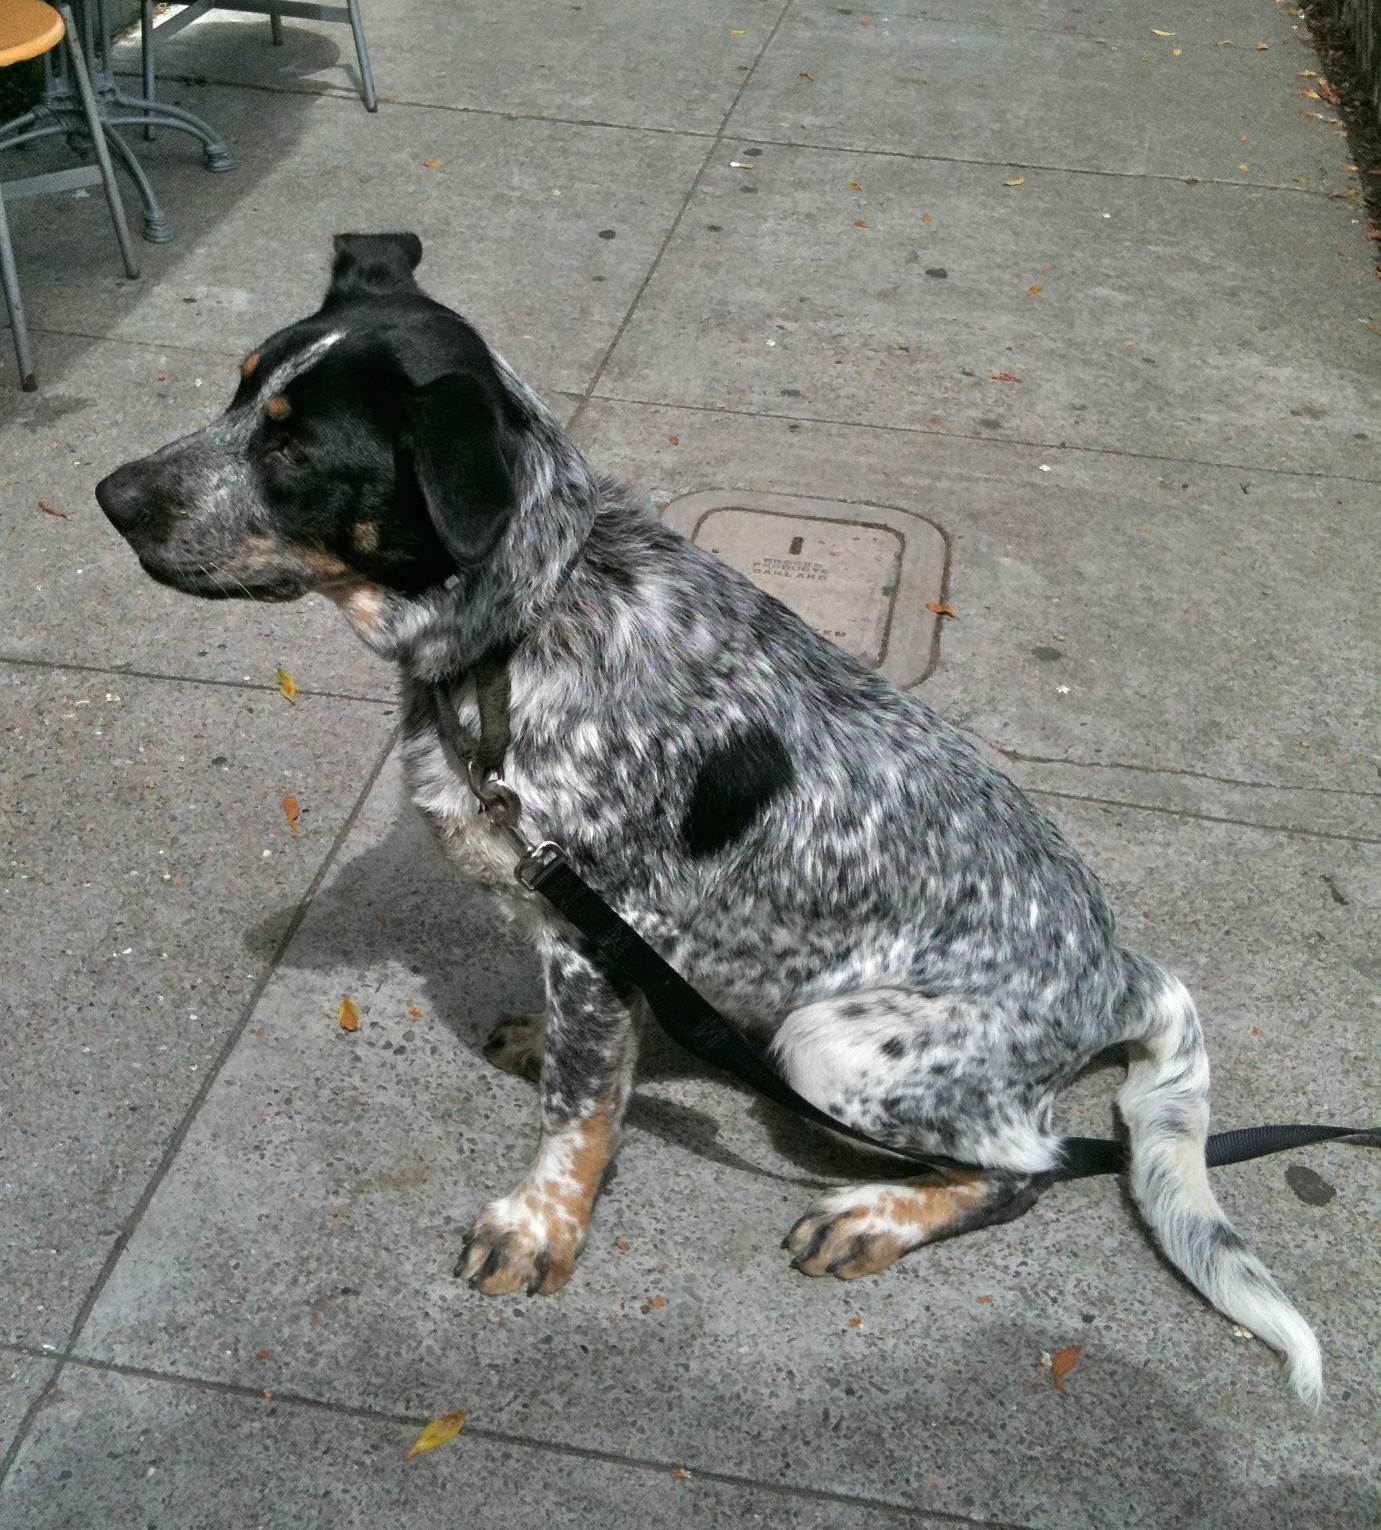 Dog Of The Day Mancha The German Shepherd Catahoula Leopard Dog Mix The Dogs Of San Francisco